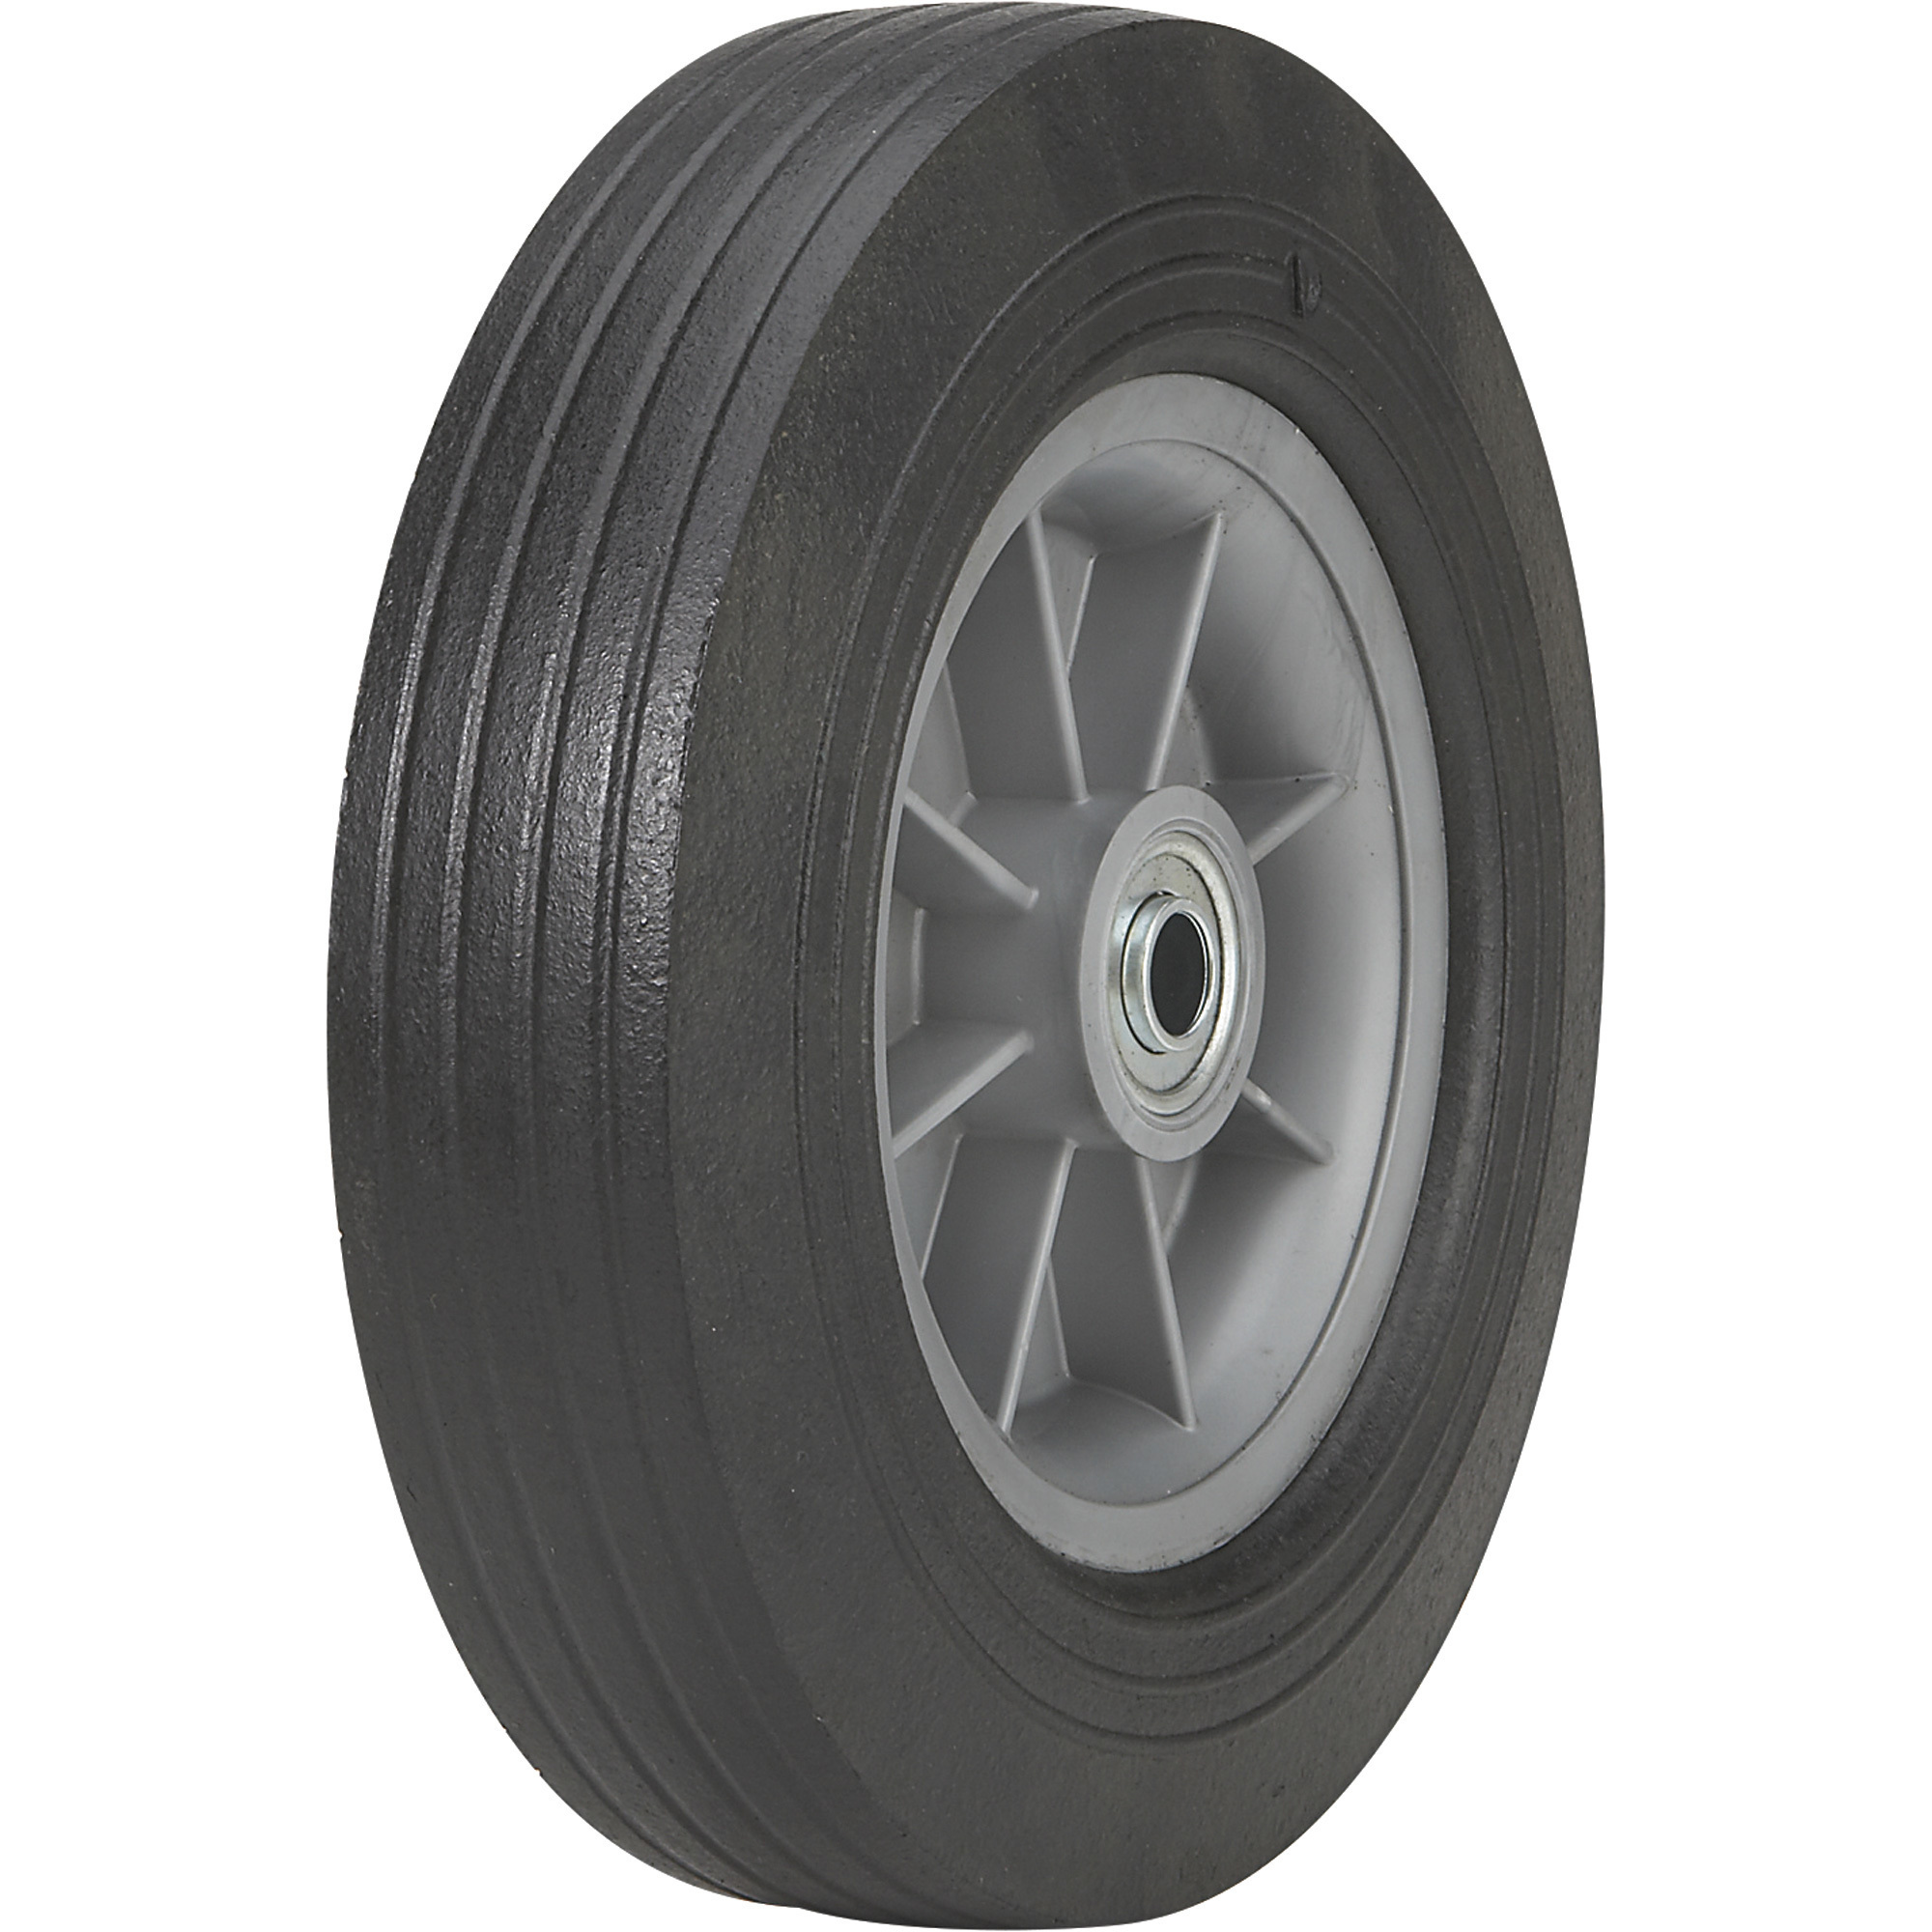 Martin Flat-Free Solid Rubber Tire and Poly Wheel â 10 x 2.75 Tire, Model ZP1102RT-2C2